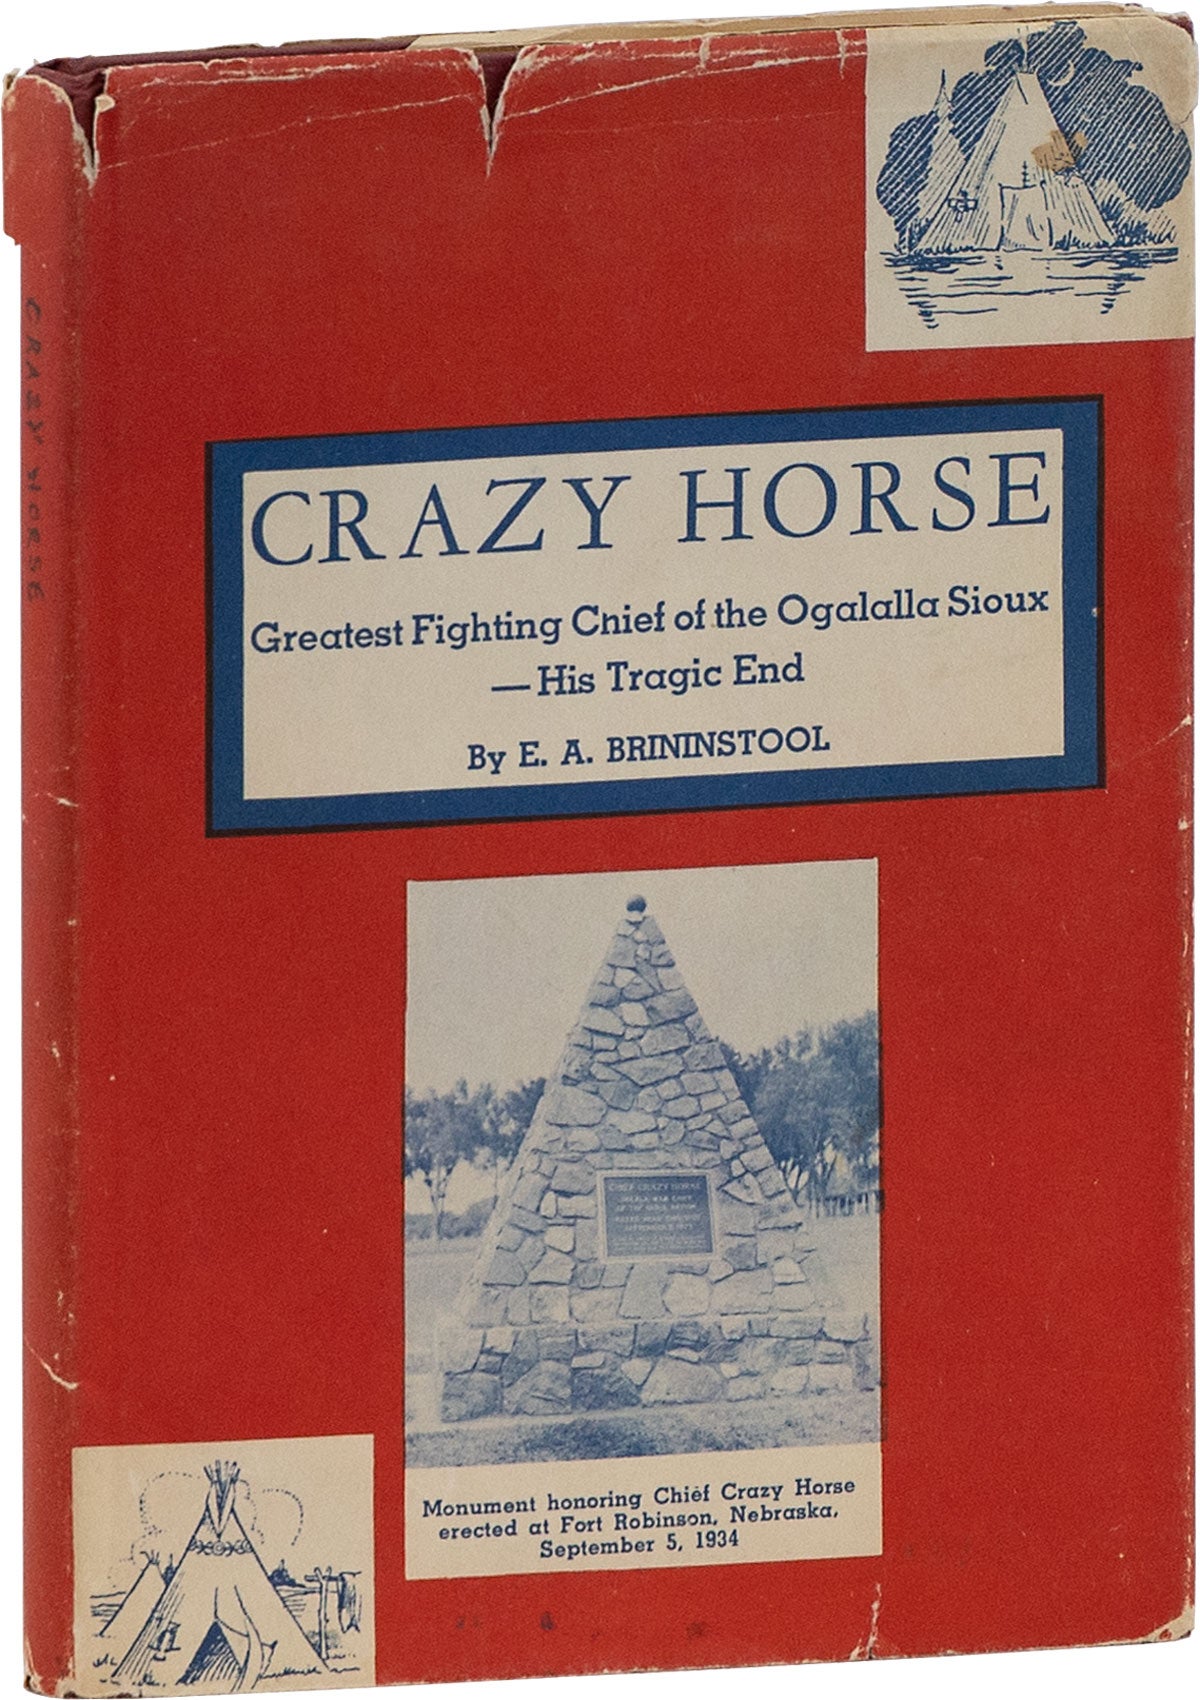 [Item #80745] Crazy Horse: the Invincible Ogalalla Sioux Chief. The "Inside Stories," by Actual Observers, of a Most Treacherous Deed Against a Great Indian Leader. E. A. BRININSTOOL, Earl Alonzo.